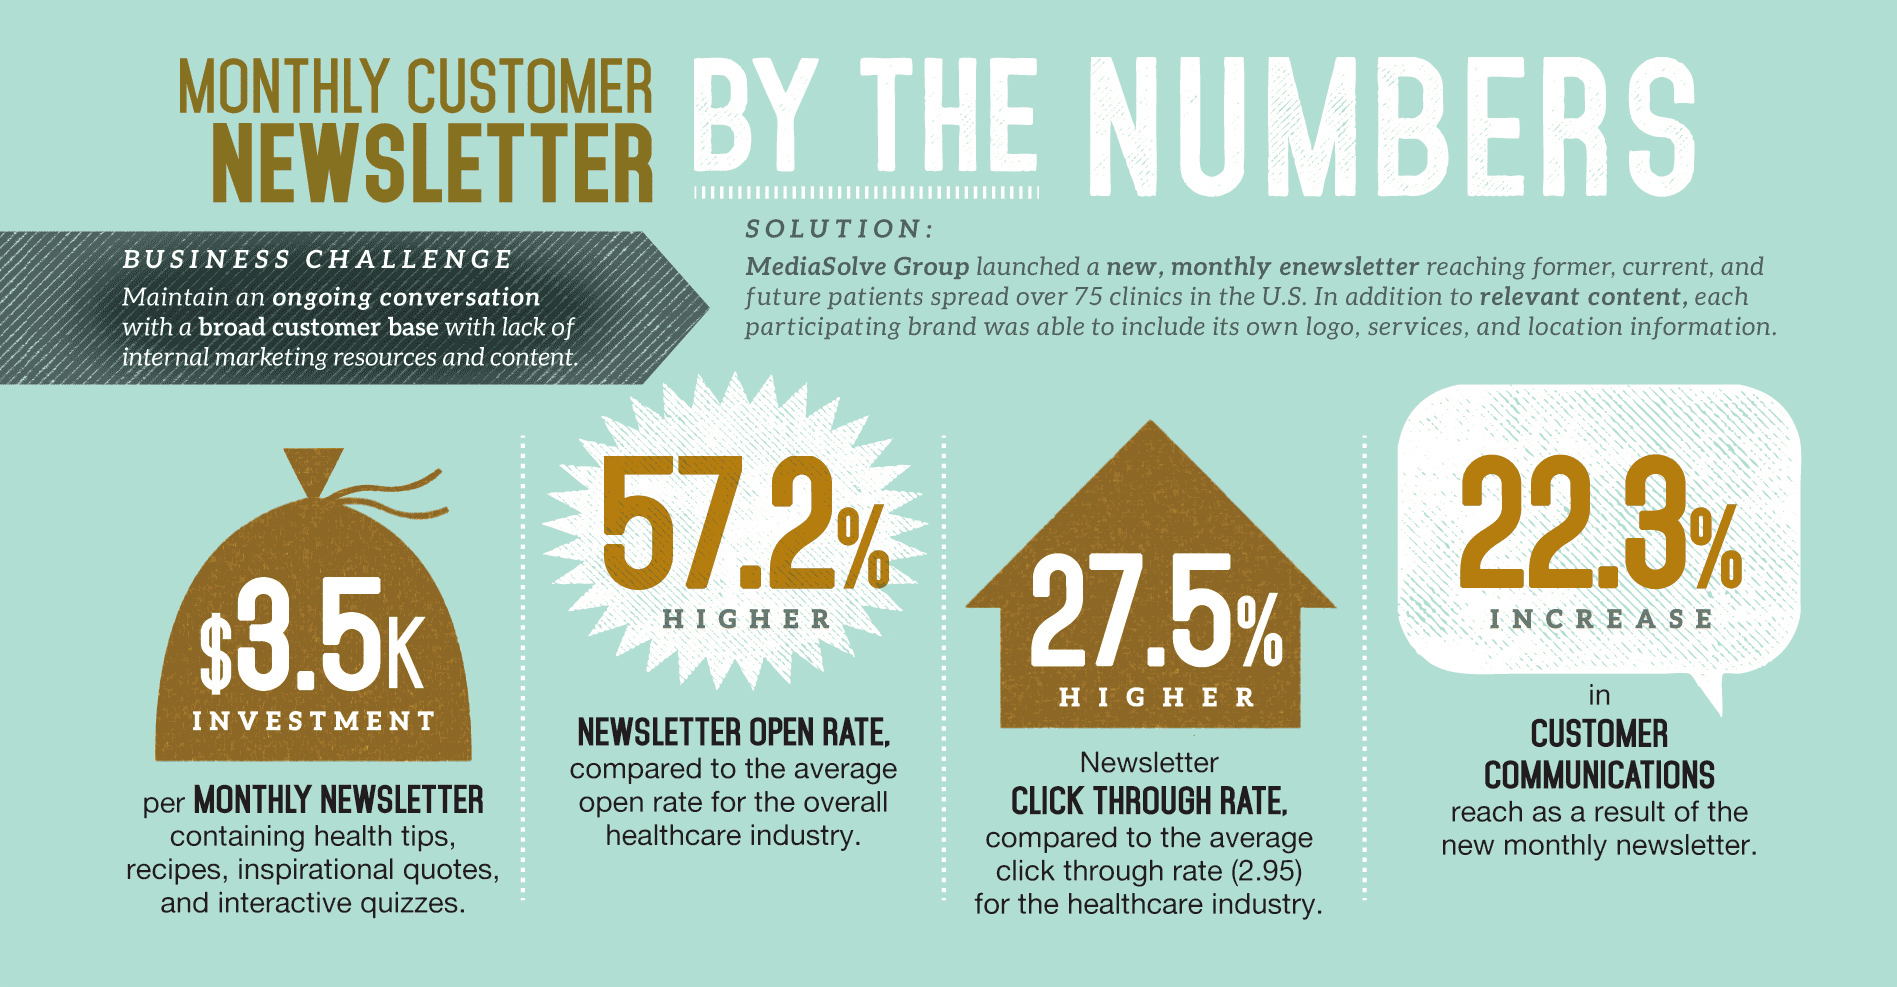 Monthly customer newsletter by the numbers: higher newsletter open rate, higher click through rate, increase in customer communications